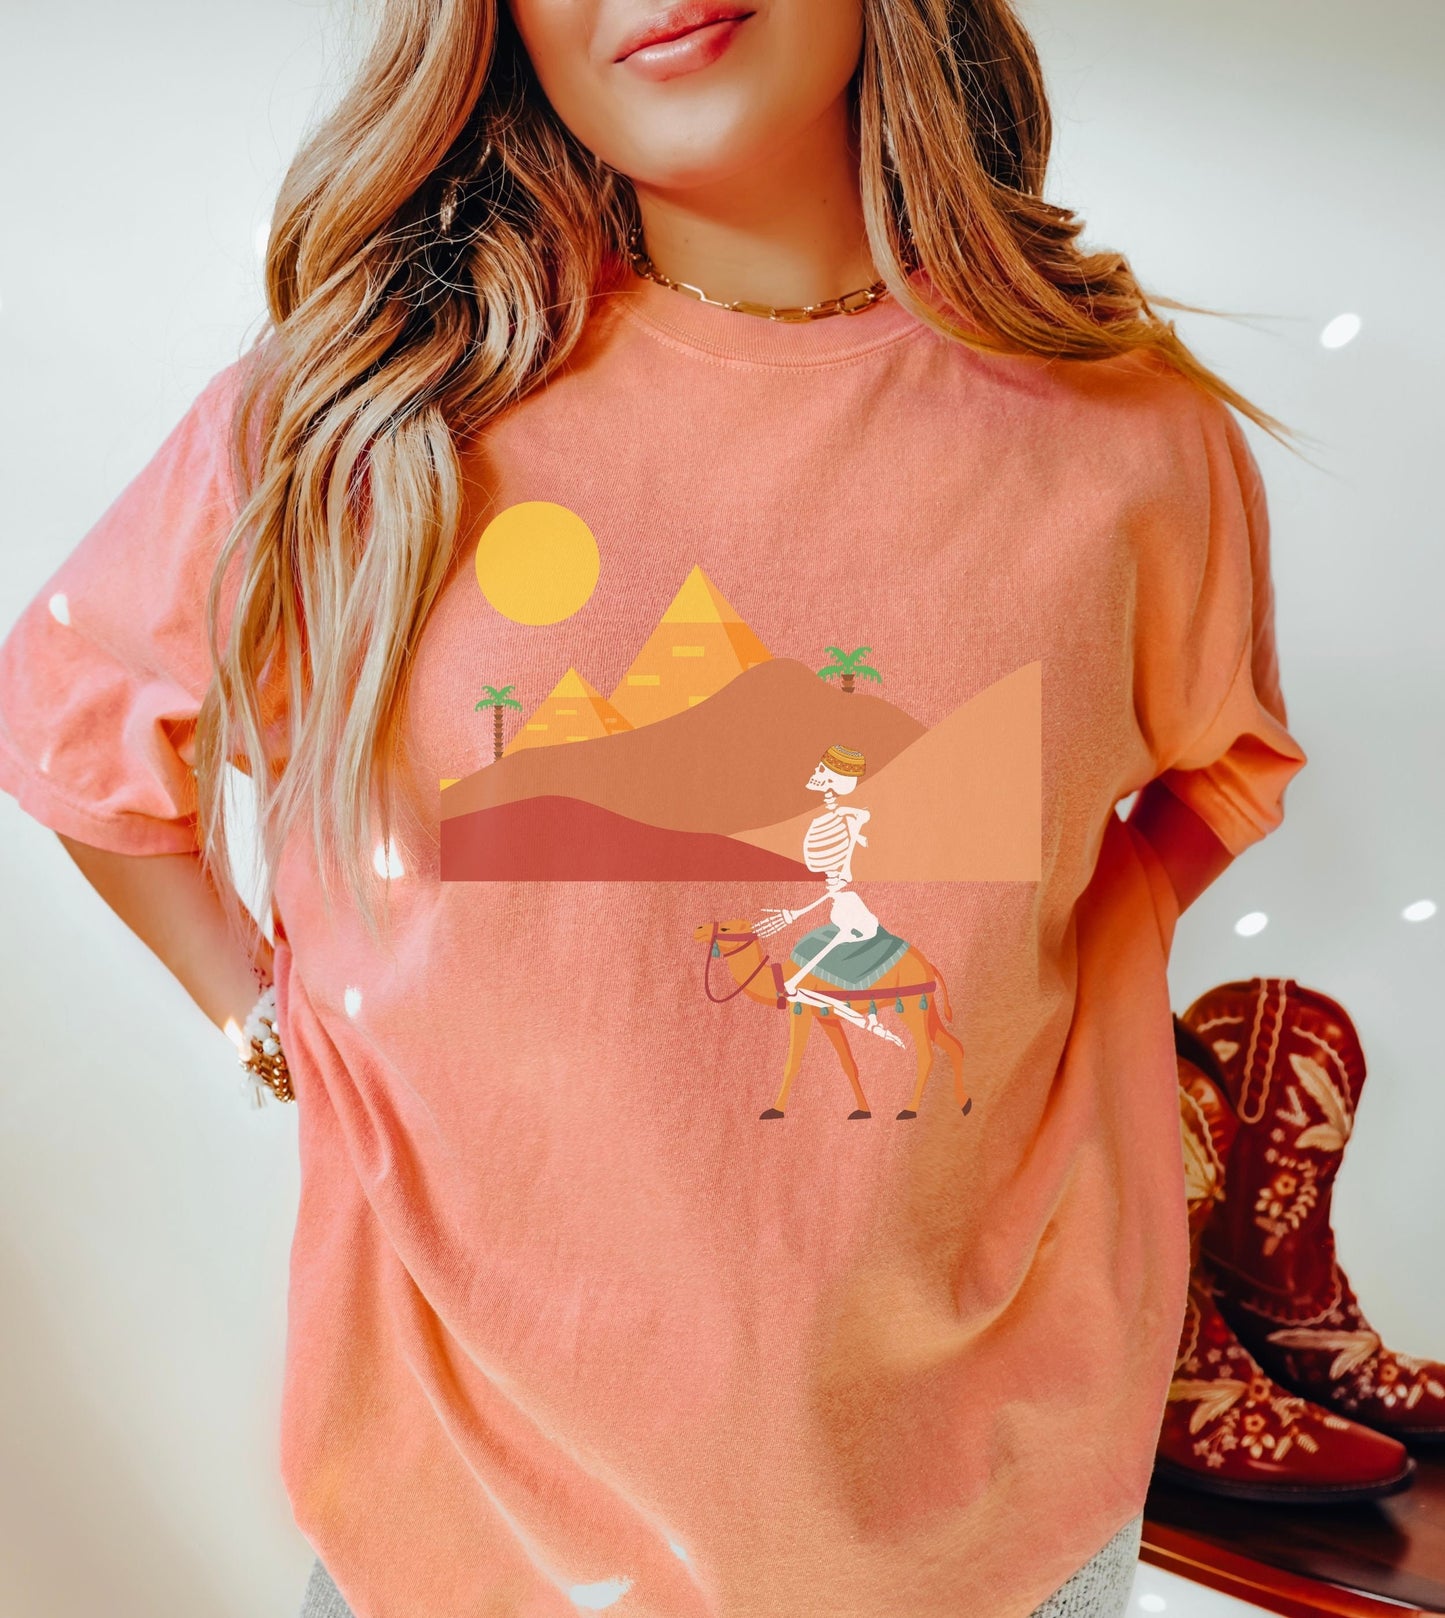 A woman wearing a cute, vintage terracotta colored shirt with a skeleton wearing an Egyptian hat riding a brown camel through the desert, the Egyptian pyramids in the distance behind sand dunes and palm trees with the sun high in the sky.